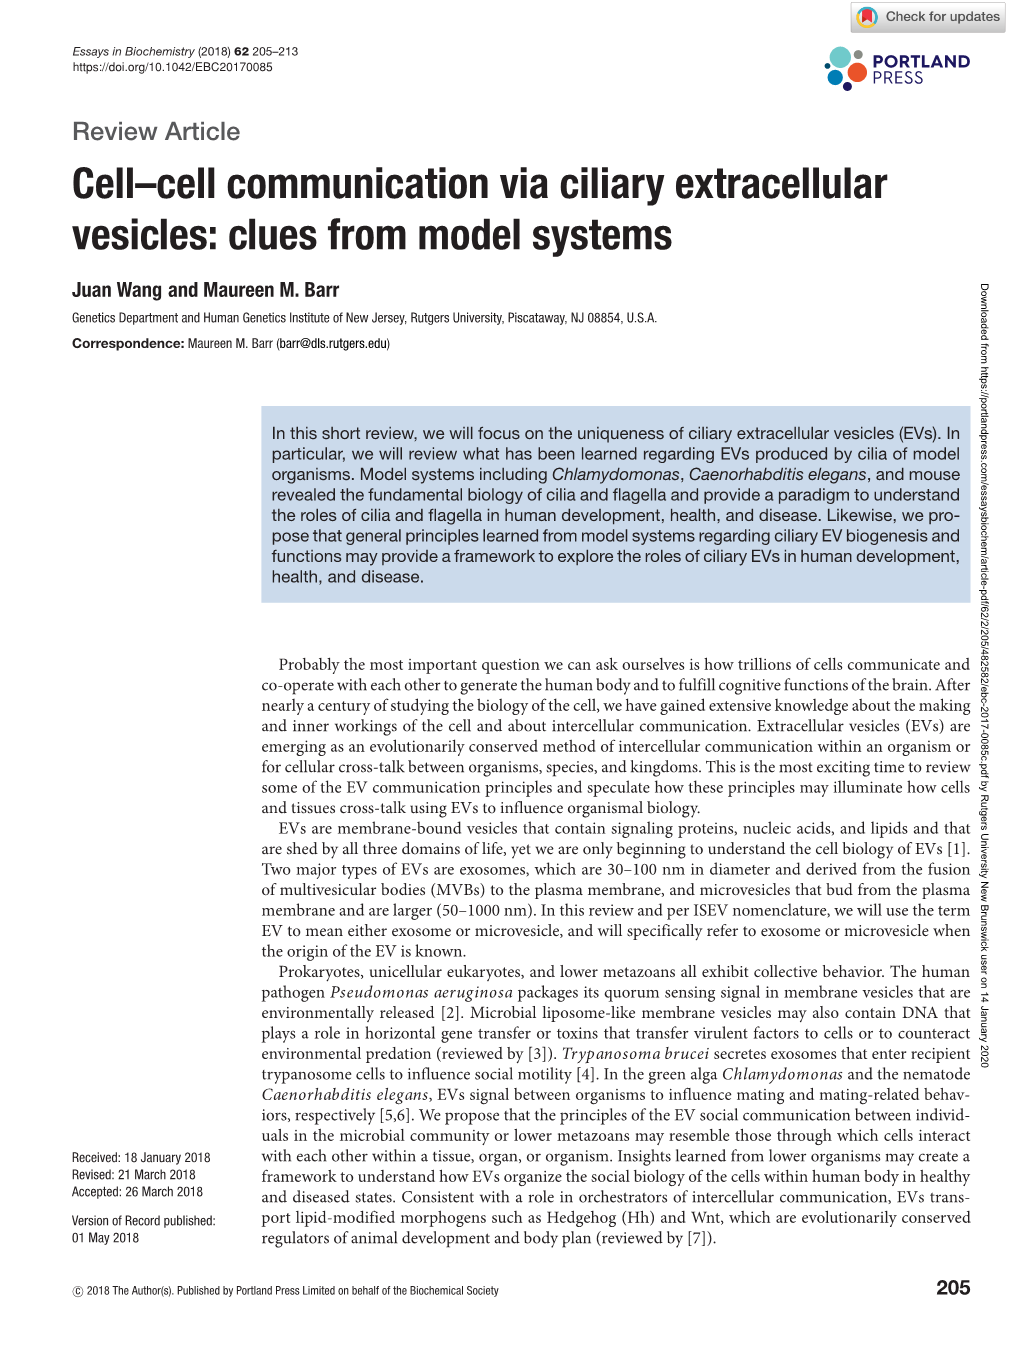 Cell–Cell Communication Via Ciliary Extracellular Vesicles: Clues from Model Systems